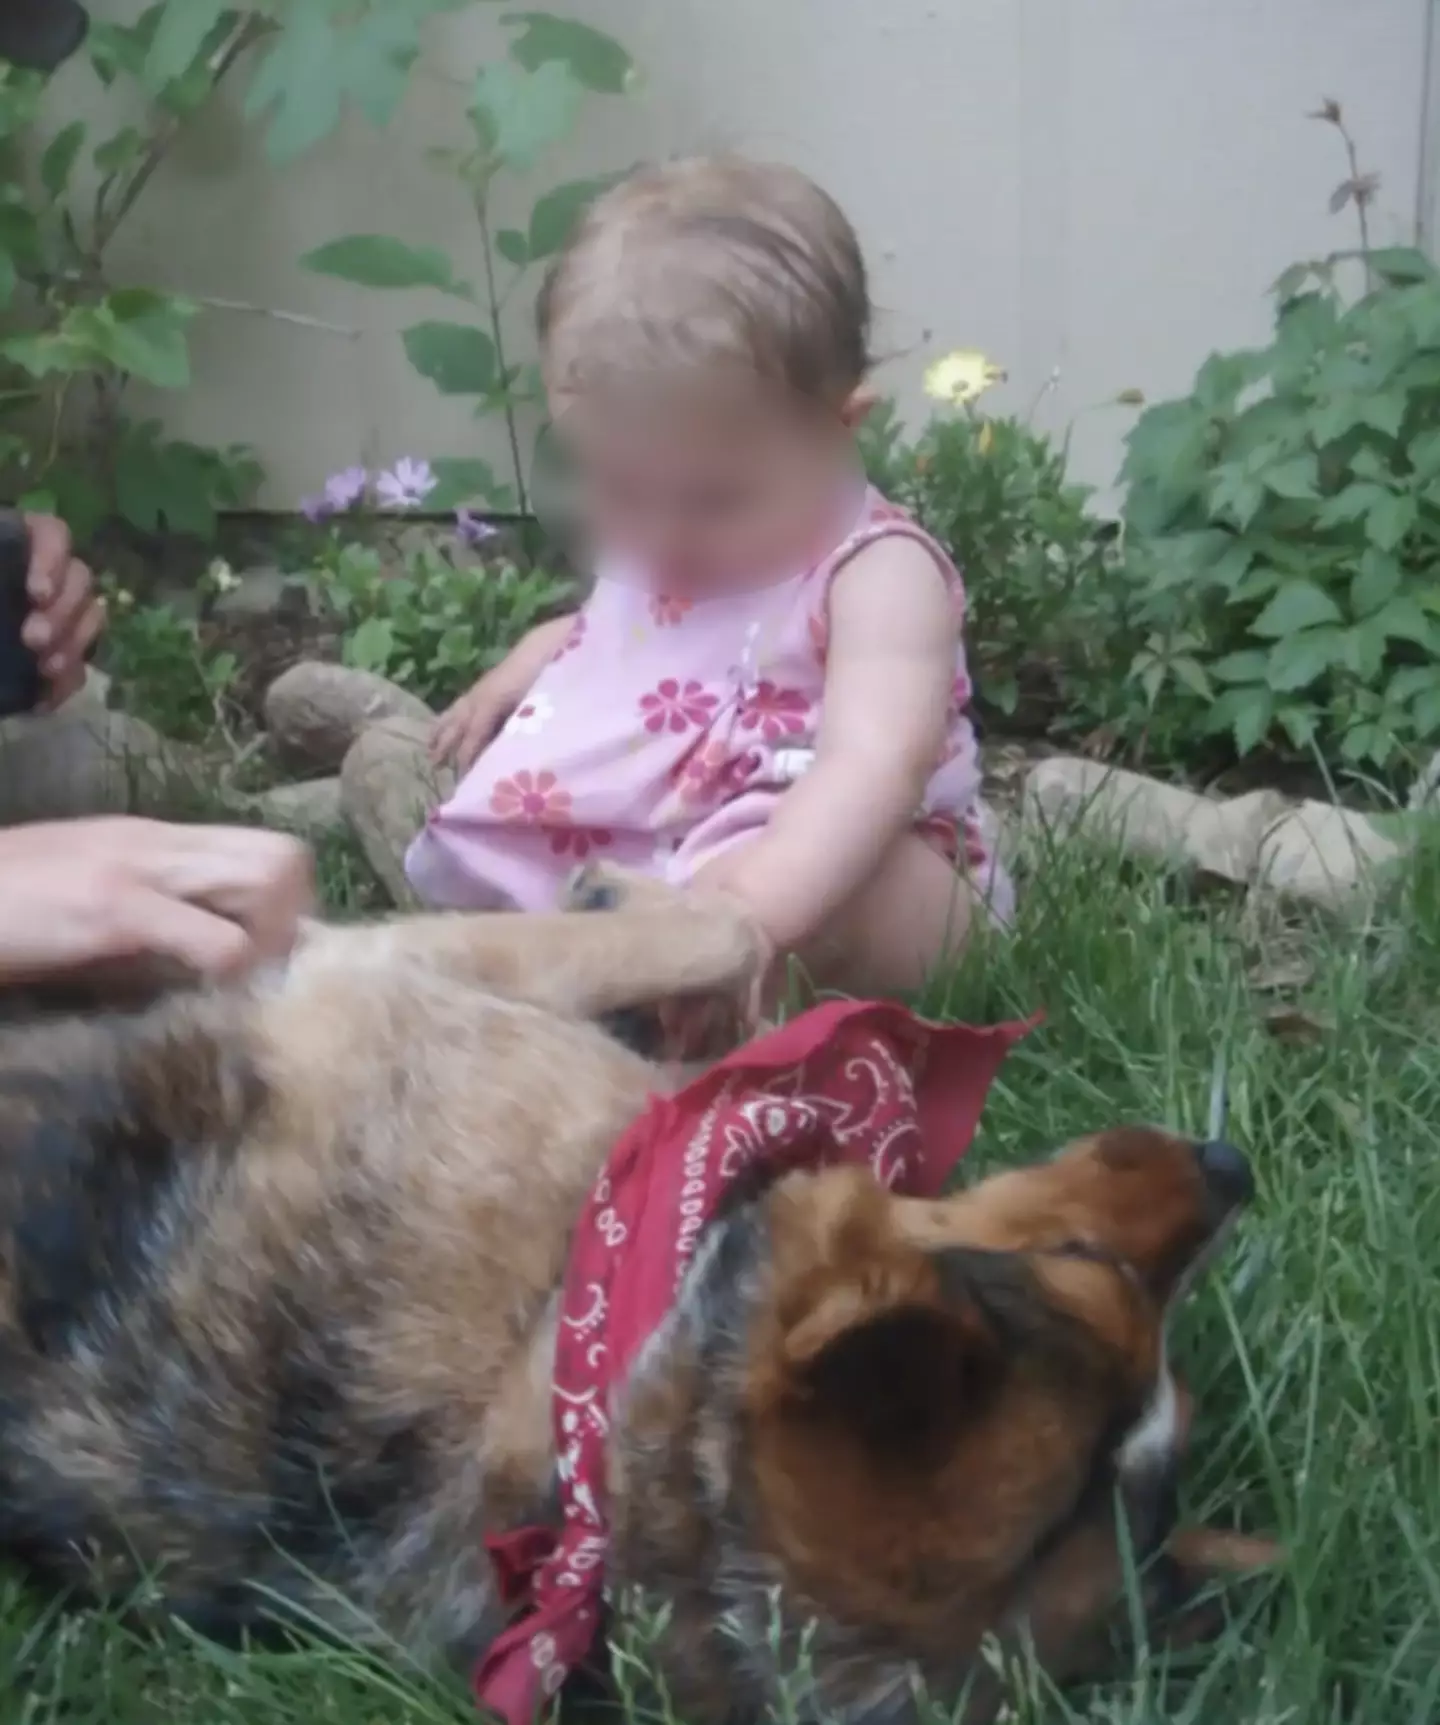 Her friend's baby meeting her dog.